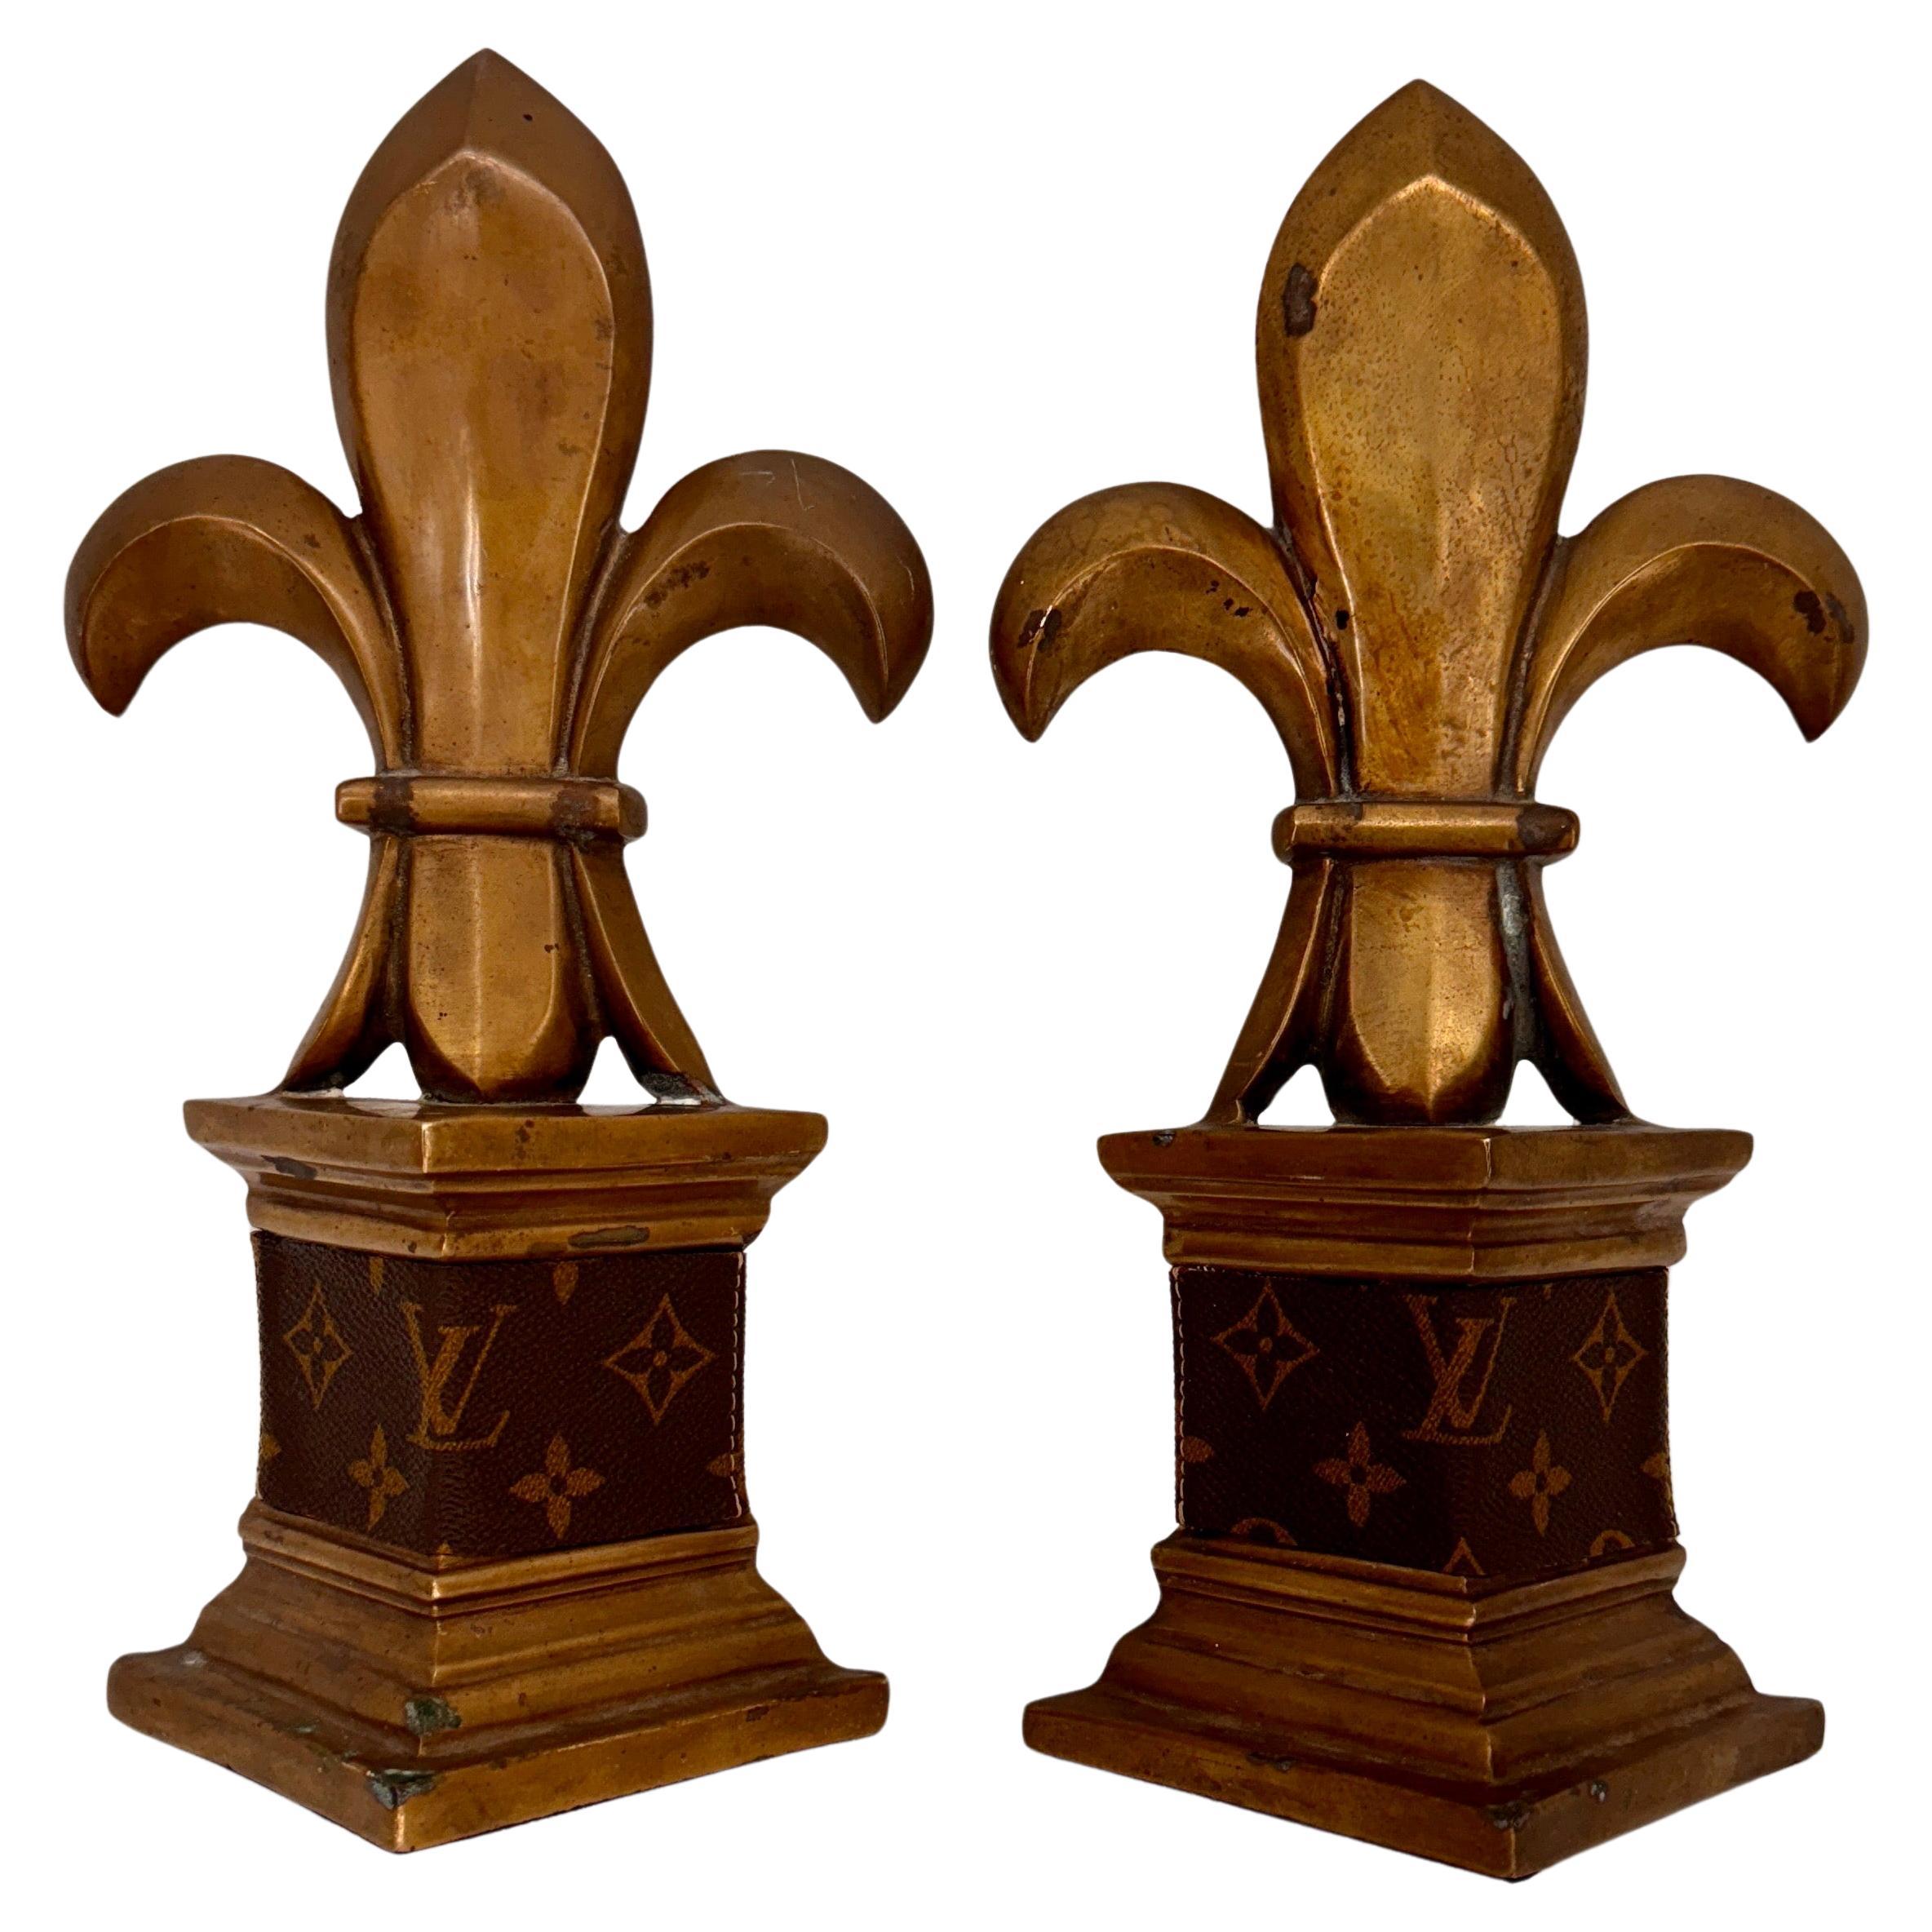 Mid-Century Pair of Brass Bookends with Louis Vuitton Monogram Fabric

These custom made, substantial and very classic French fleur de lis bookends are hand crafted with authentic LV fabric. This classic pair are absolutely one of a kind and most